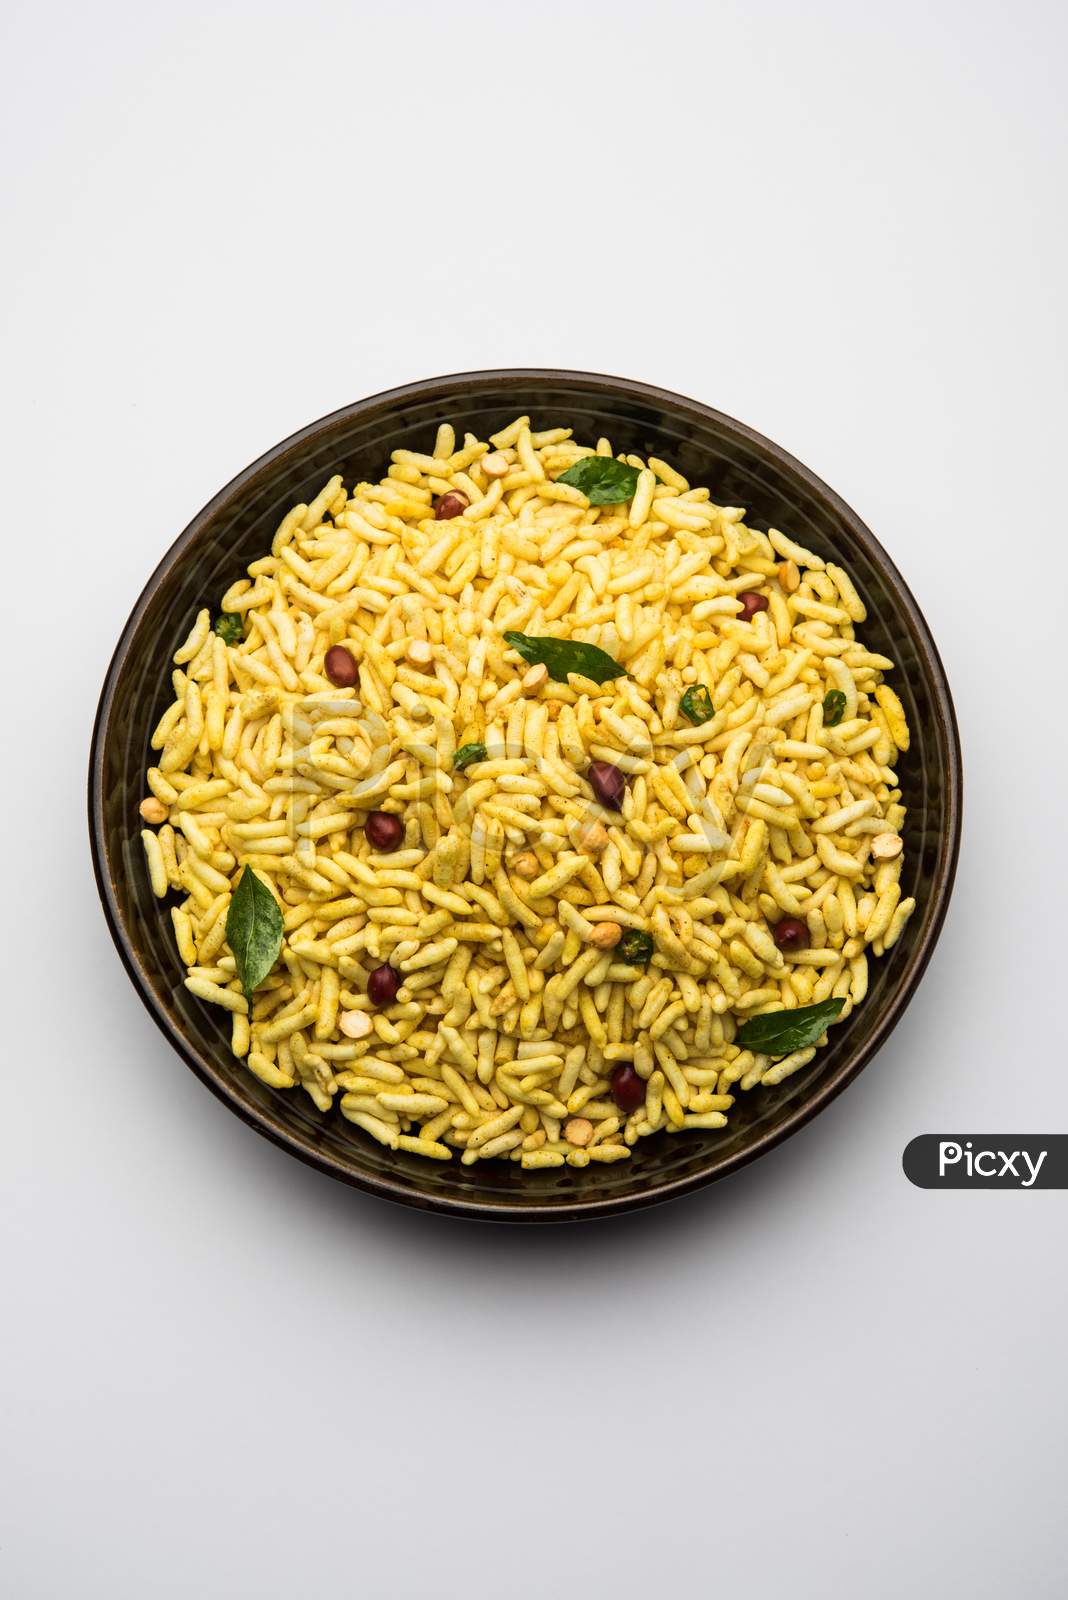 Bhadang Chivda Is A Spicy And Savory Snack From Maharashtra, India. Made Using Puffed Rice